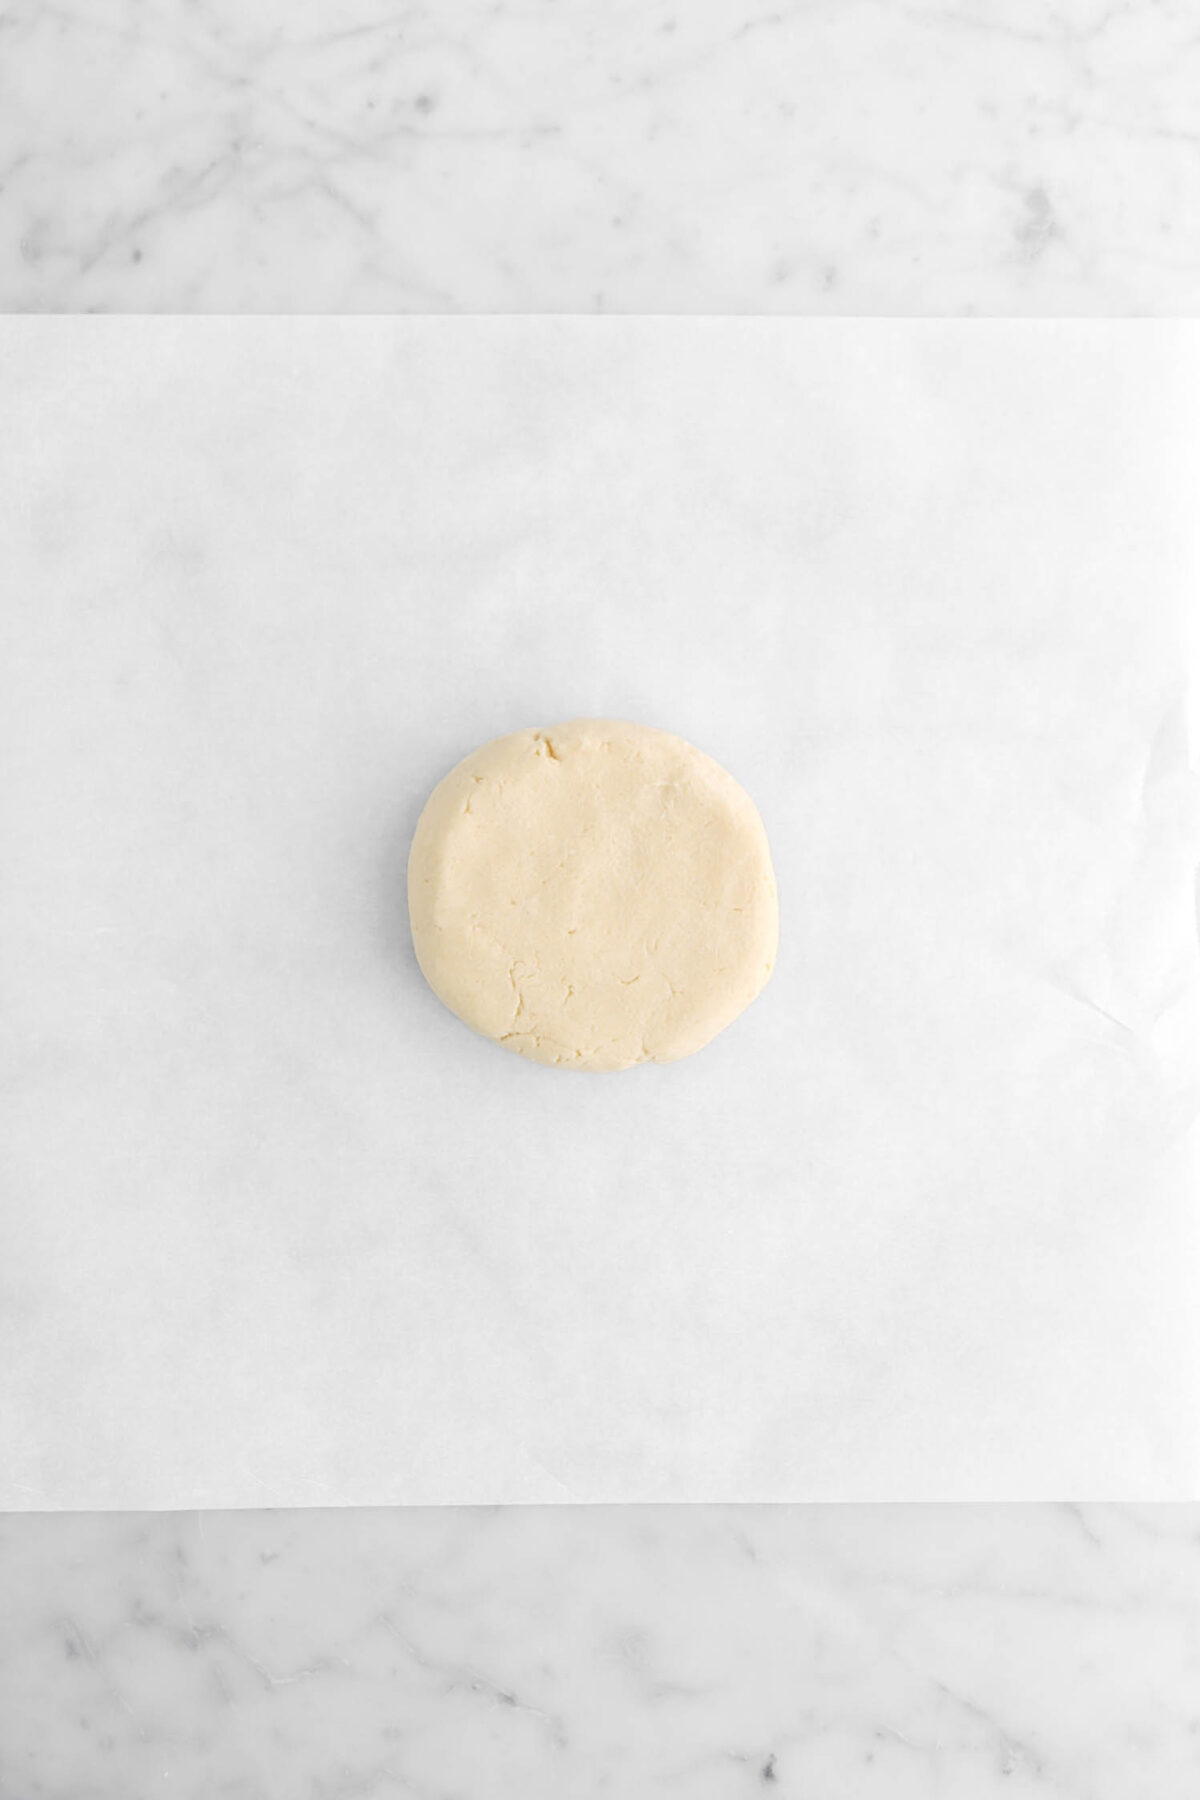 shortbread formed into a round on parchment paper.